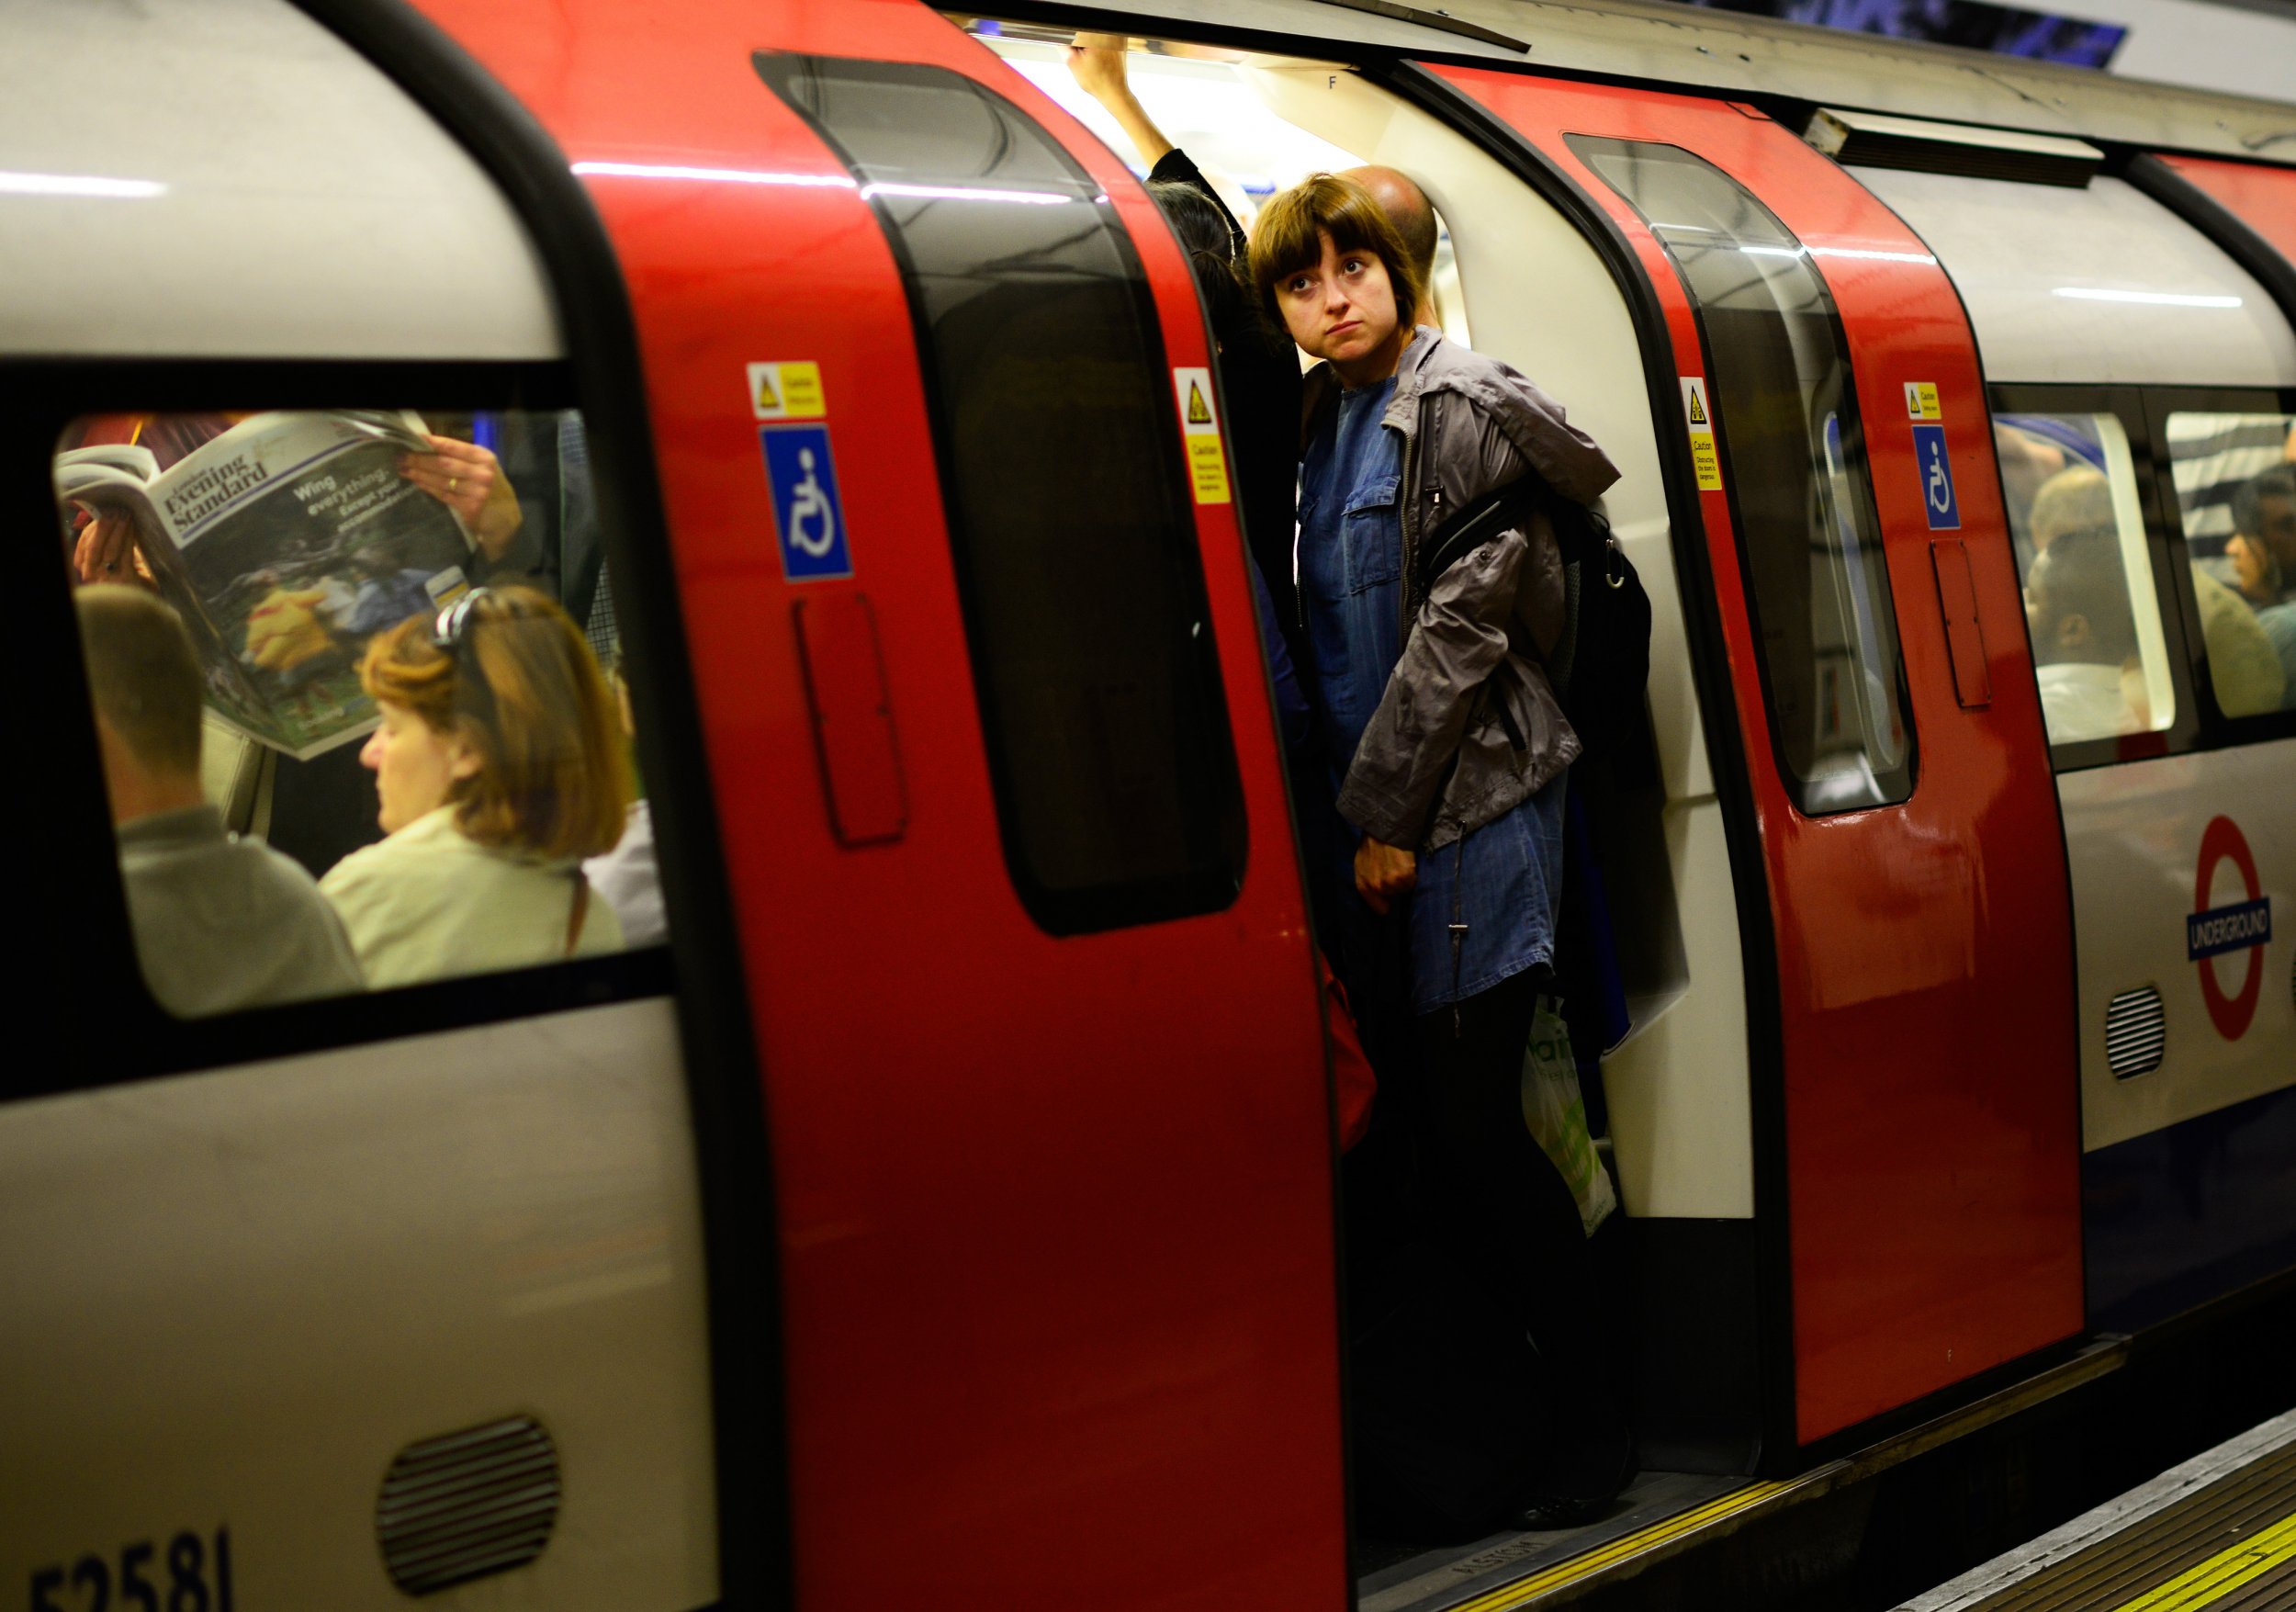 Commuters left behind more than 300,000 items on London's transport network in 2015.